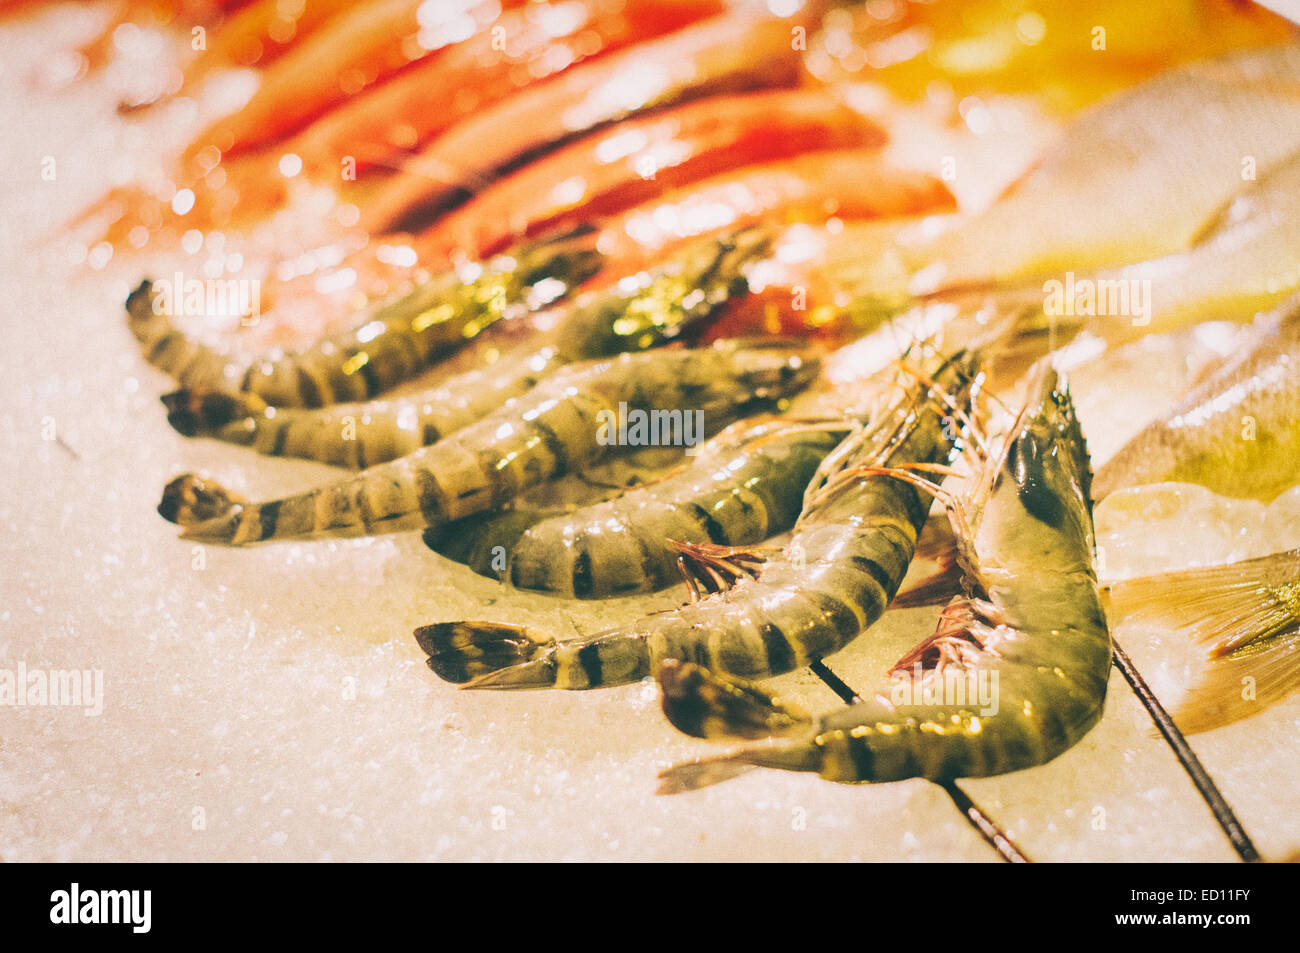 fresh giant tiger prawn seafood as gourmet food concepts. Stock Photo